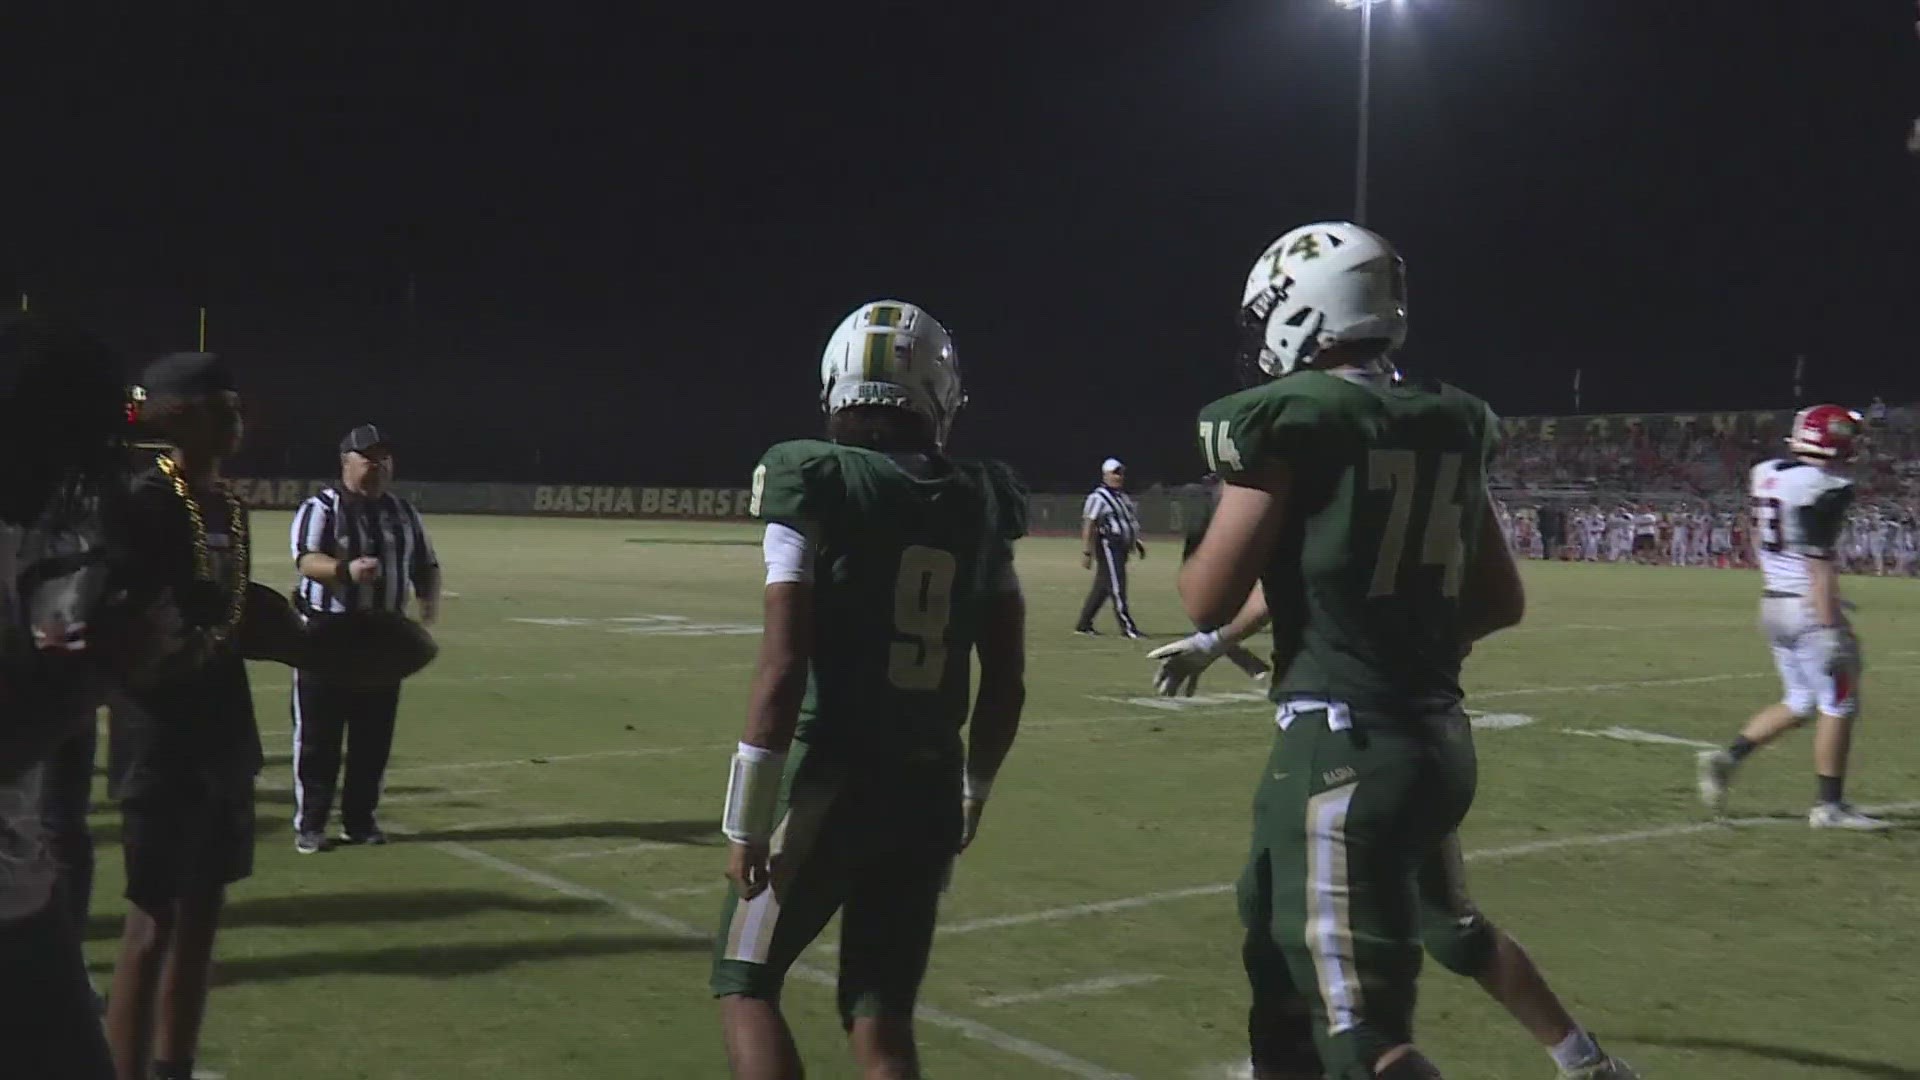 In our Week 6 Thursday Night Fever game of the week, the Basha Bears beat the Brophy Broncos, 31-13